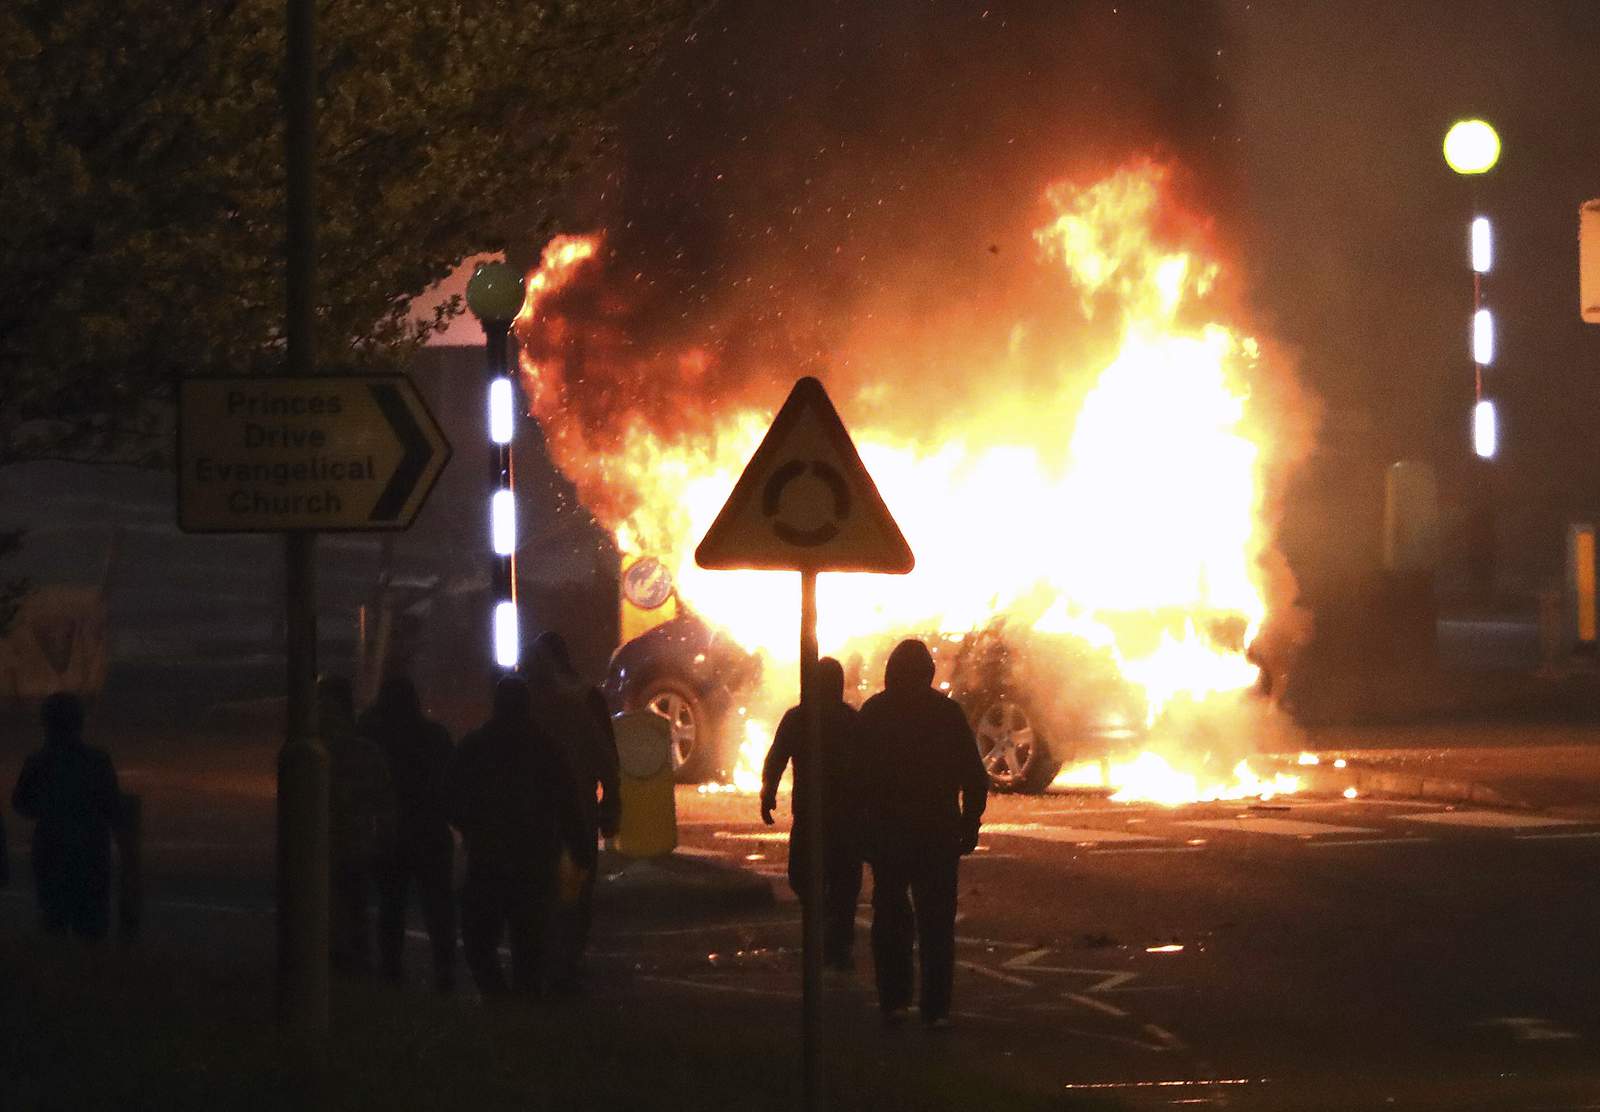 N Ireland sees 3rd night of unrest amid post-Brexit tensions